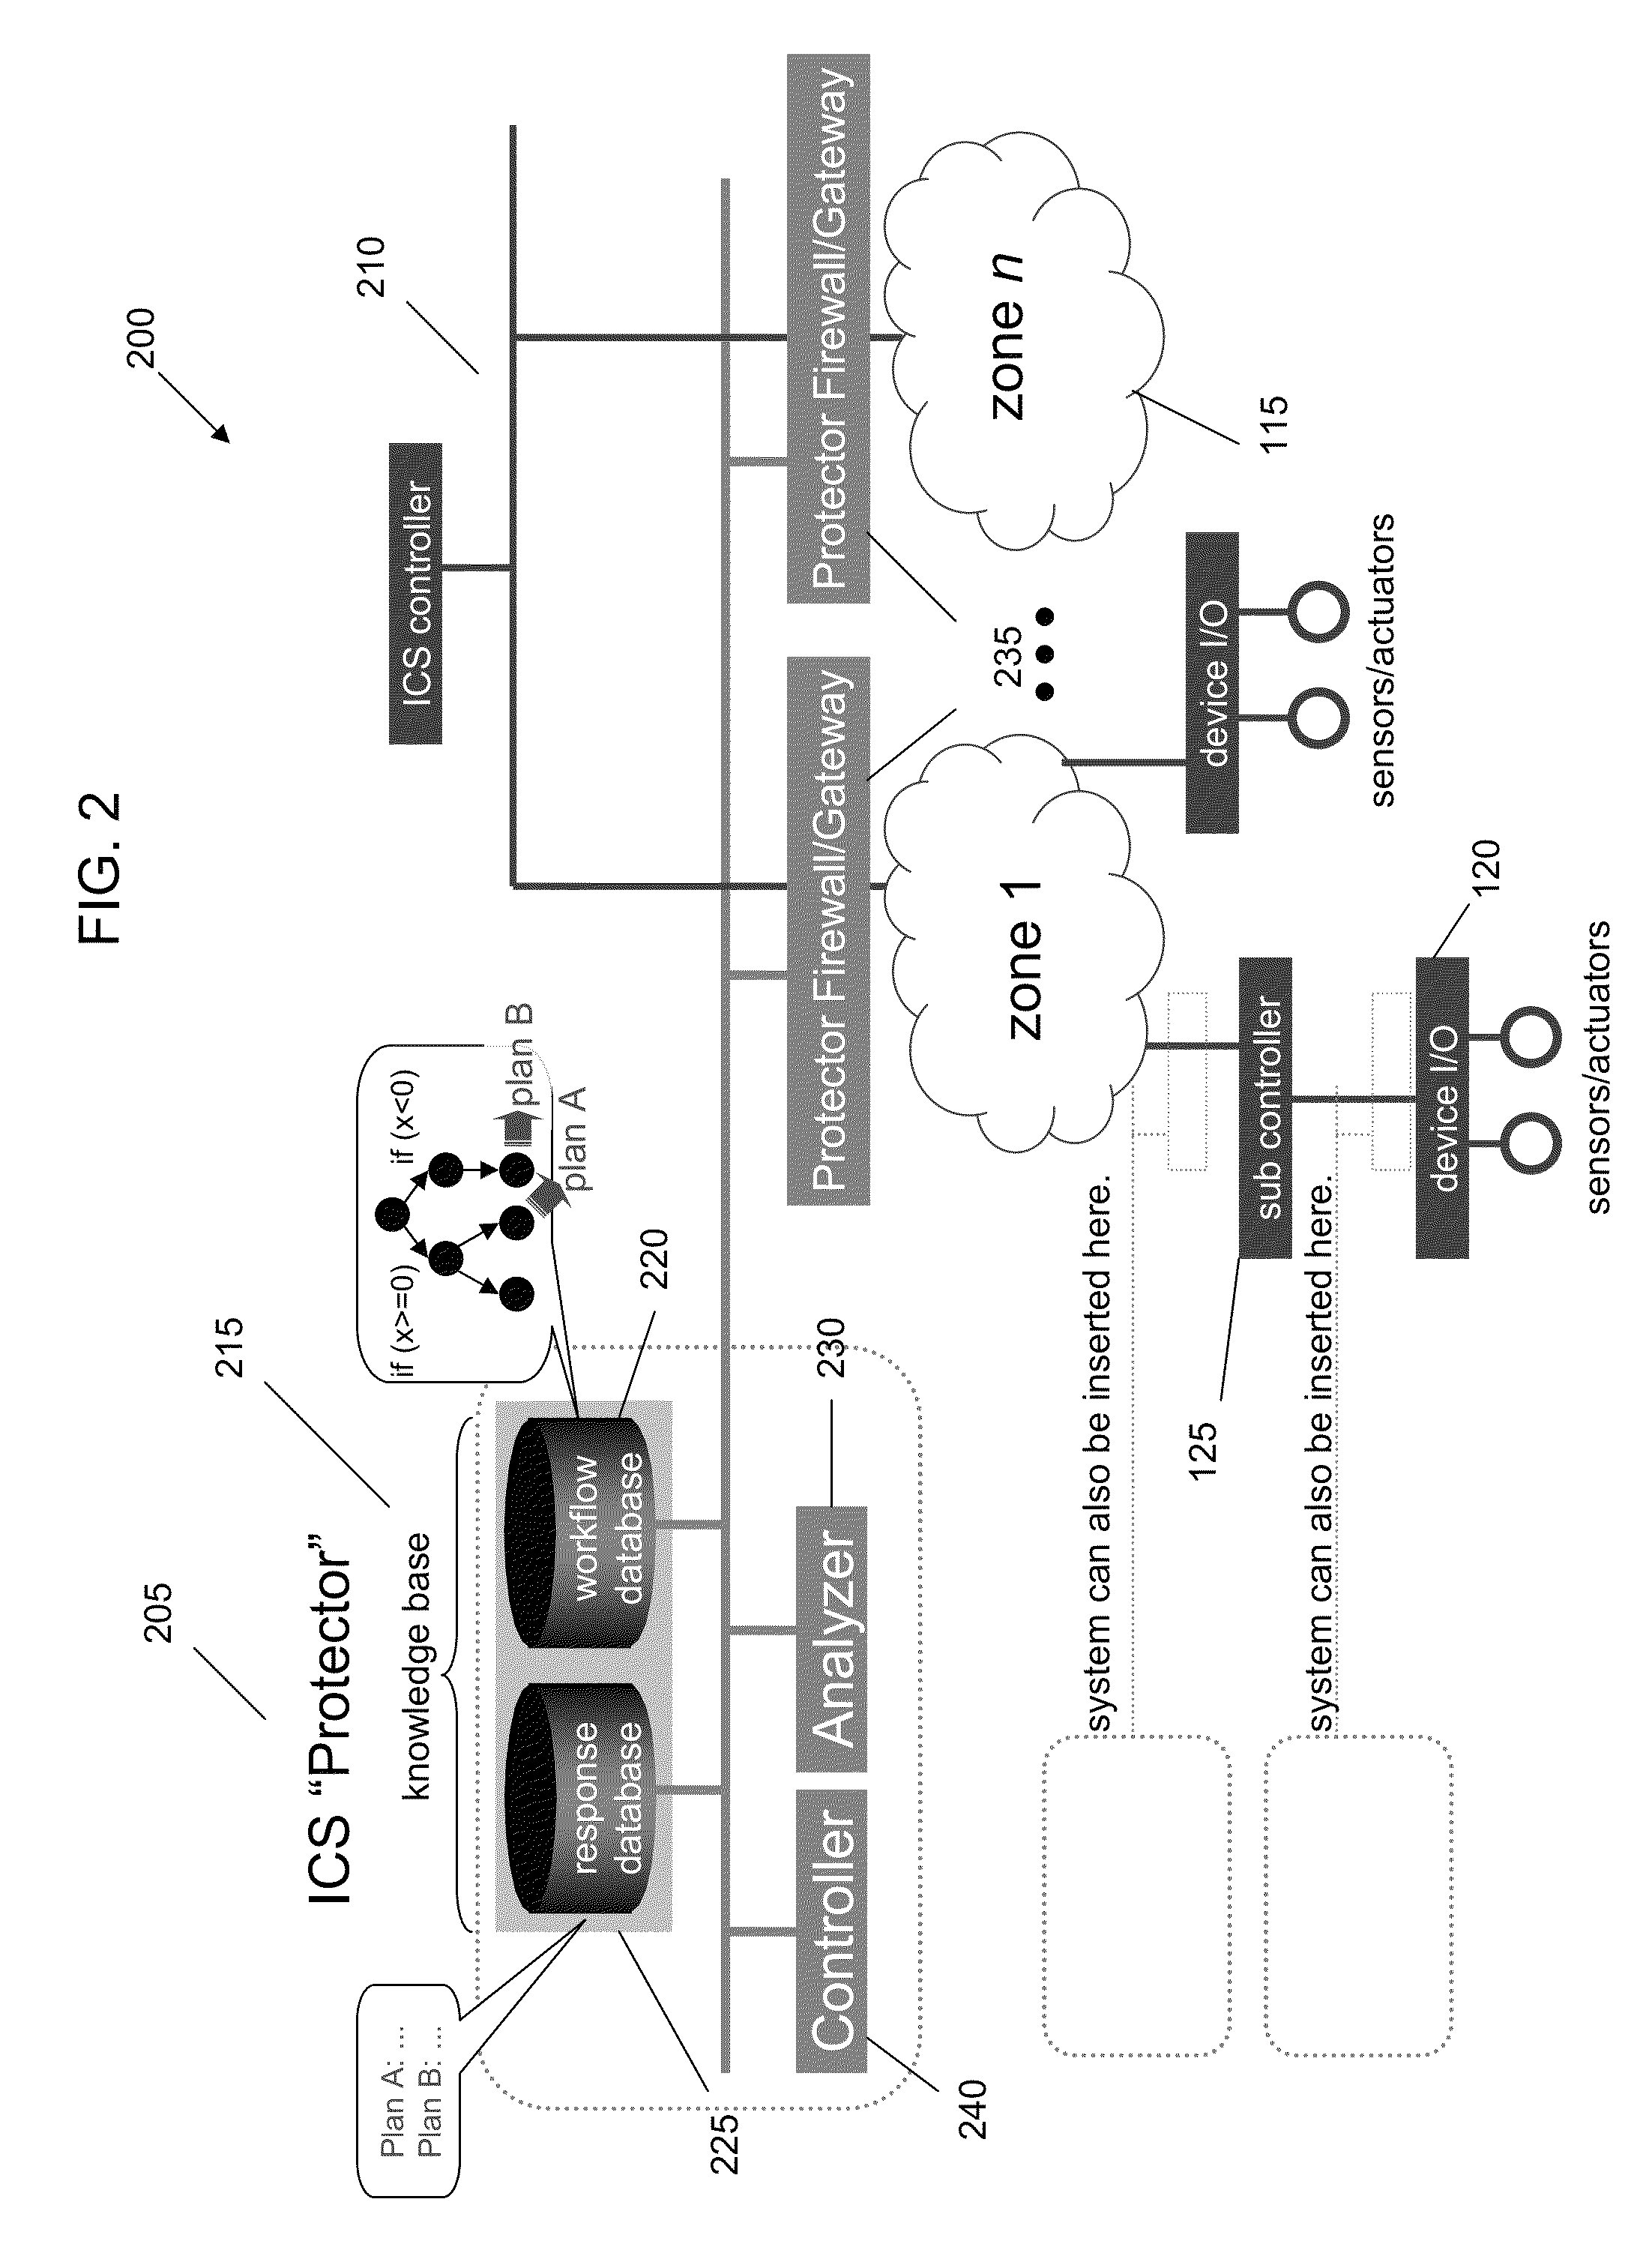 Detecting and combating attack in protection system of an industrial control system